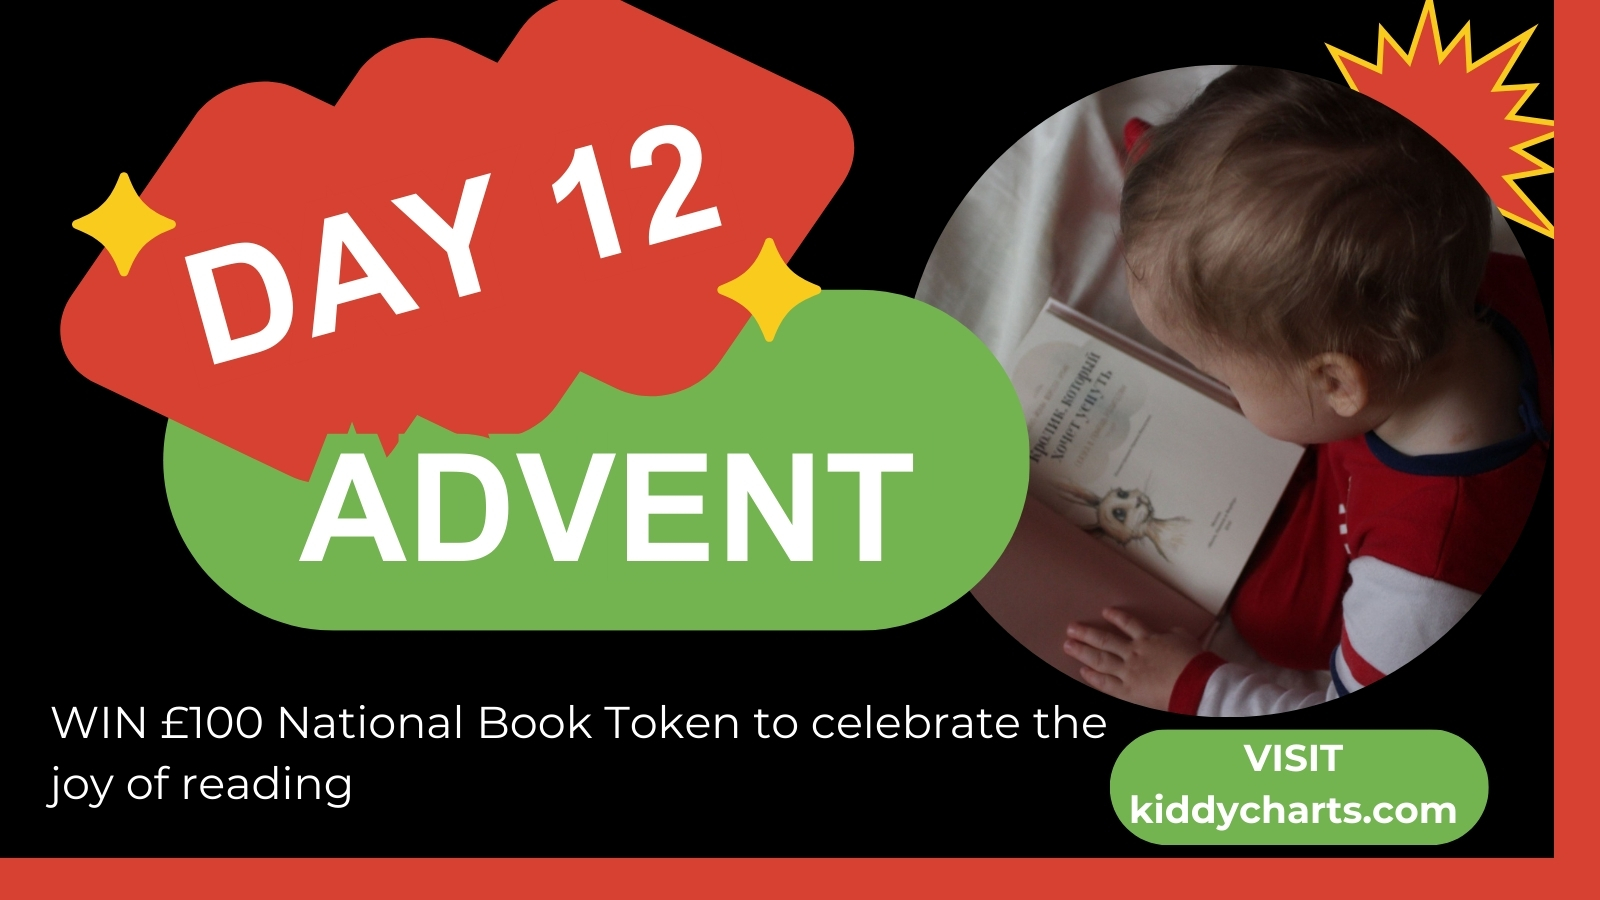 Day 12: Win £100 National Book Token to celebrate our free book club and kids books #KiddyChartsAdvent